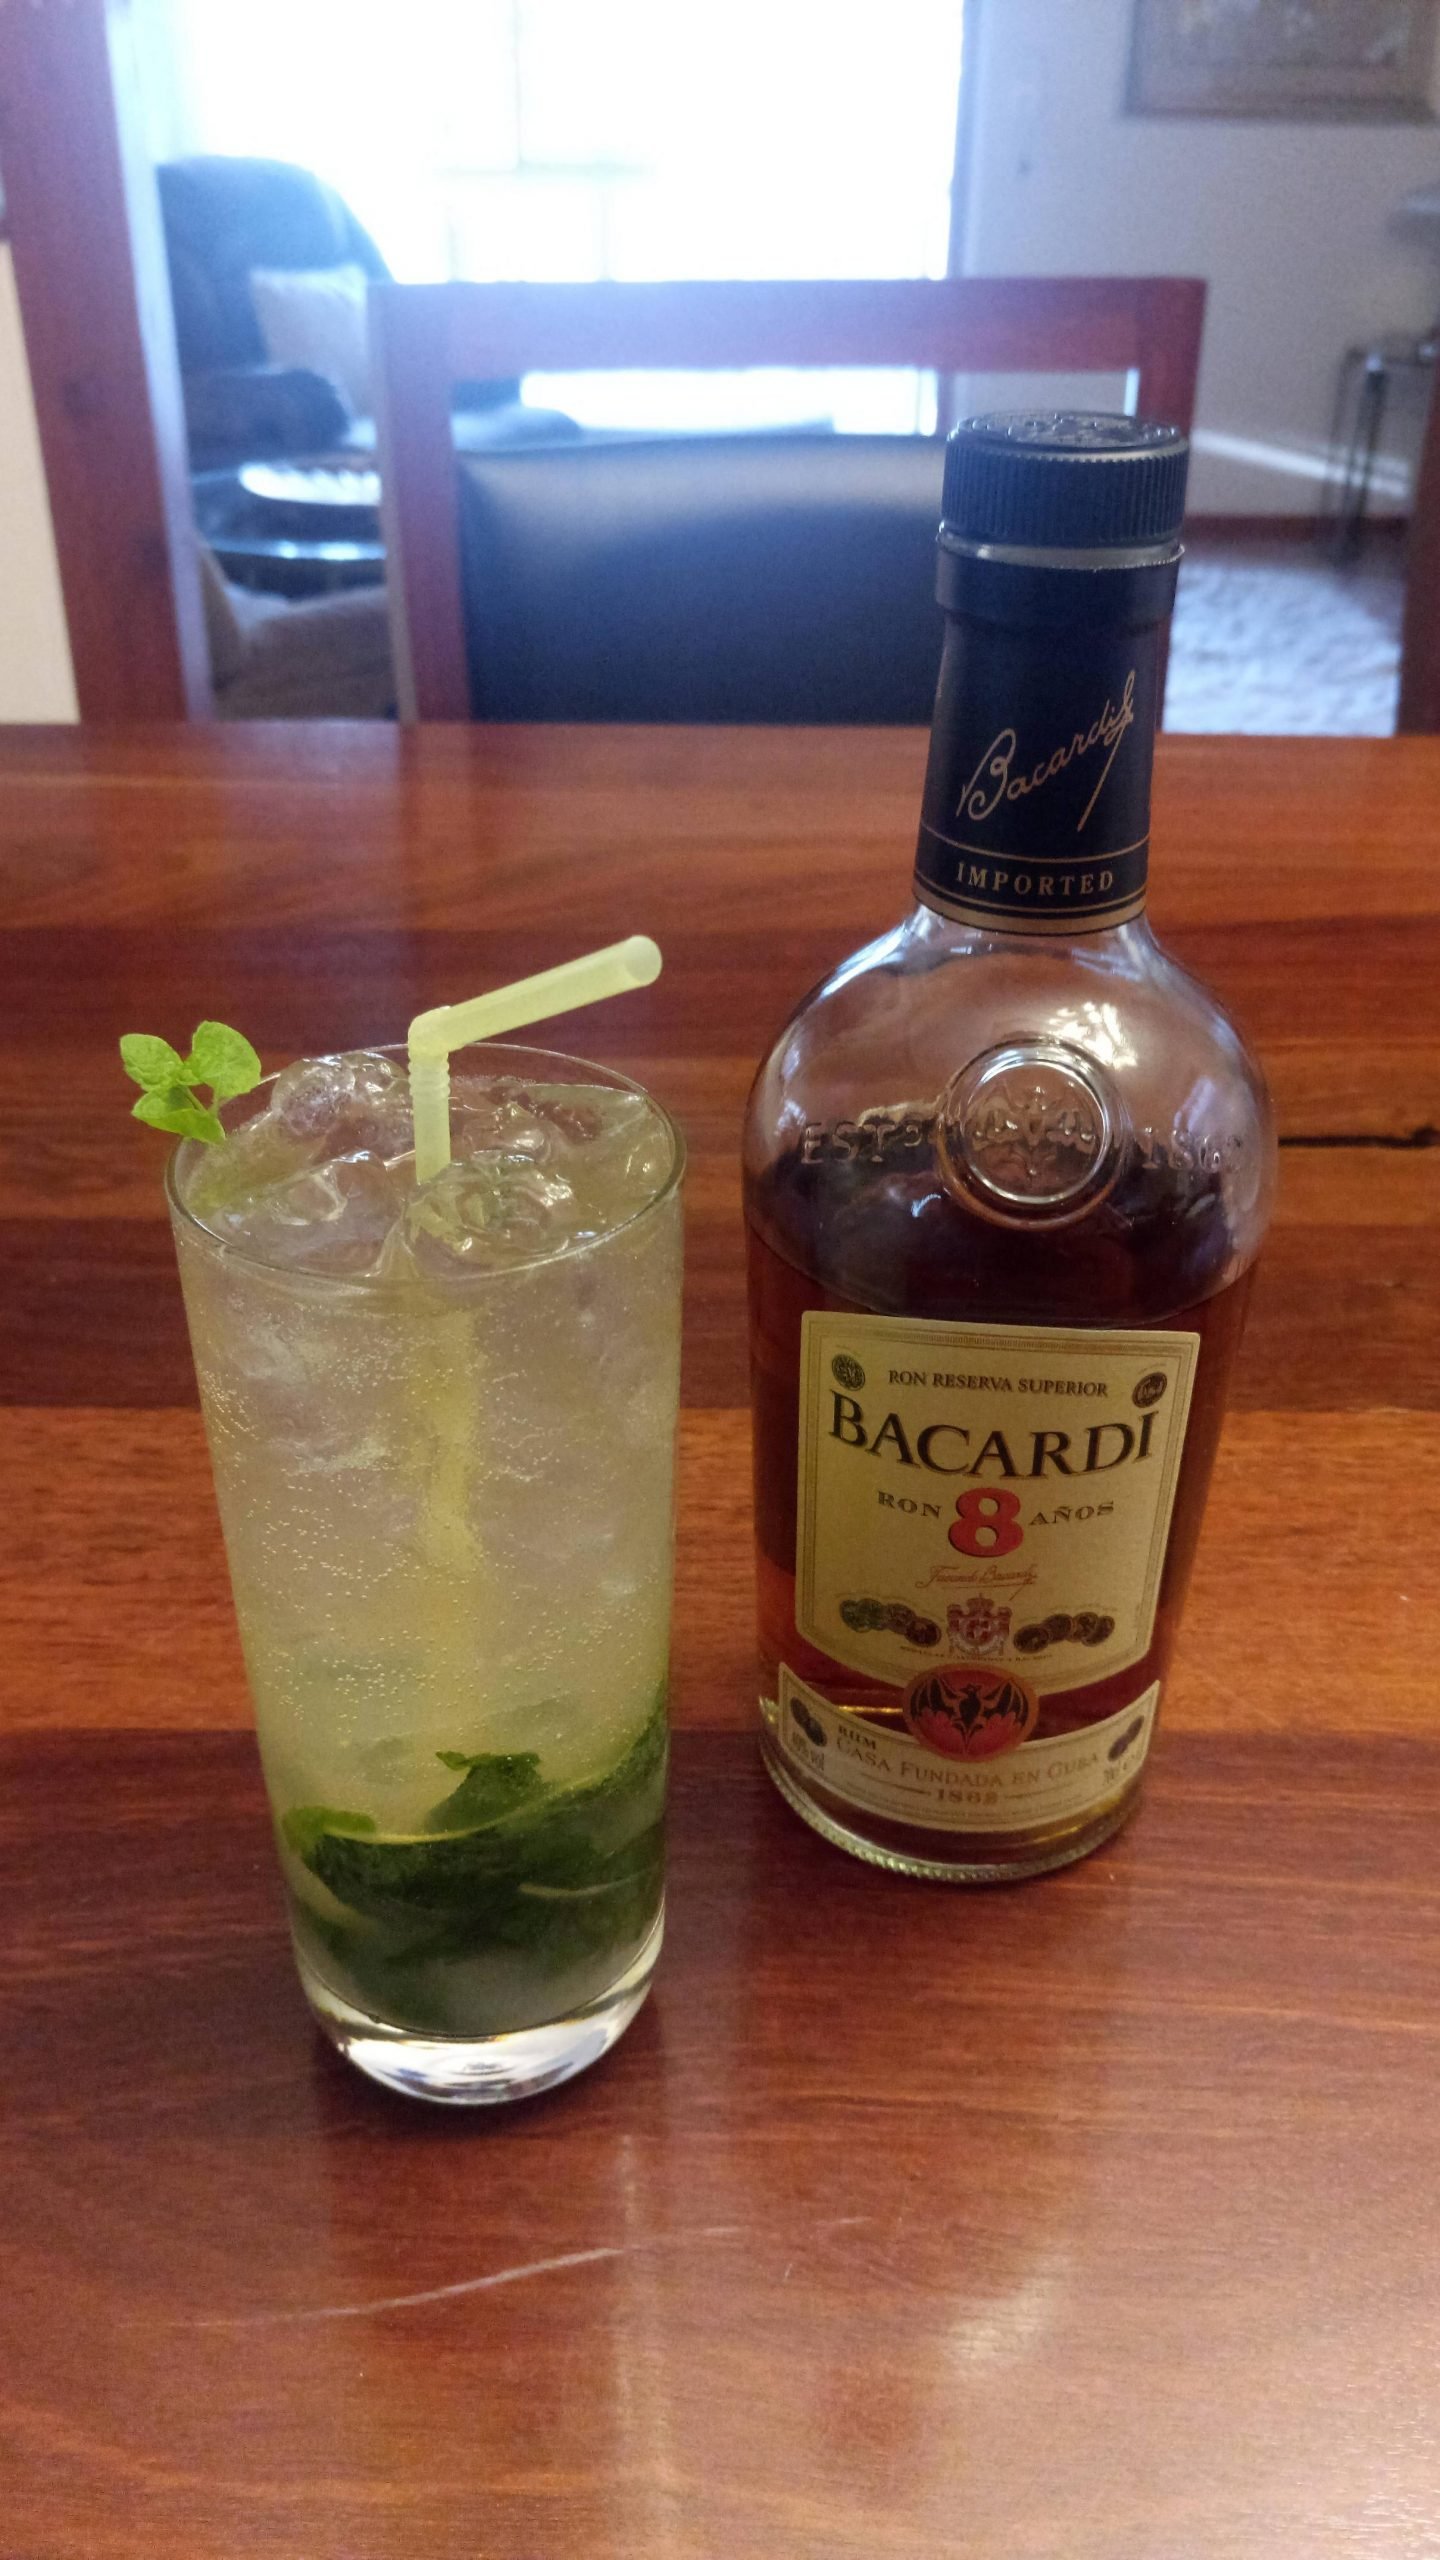 Dark rum mojito, a nice match for the summer weather we